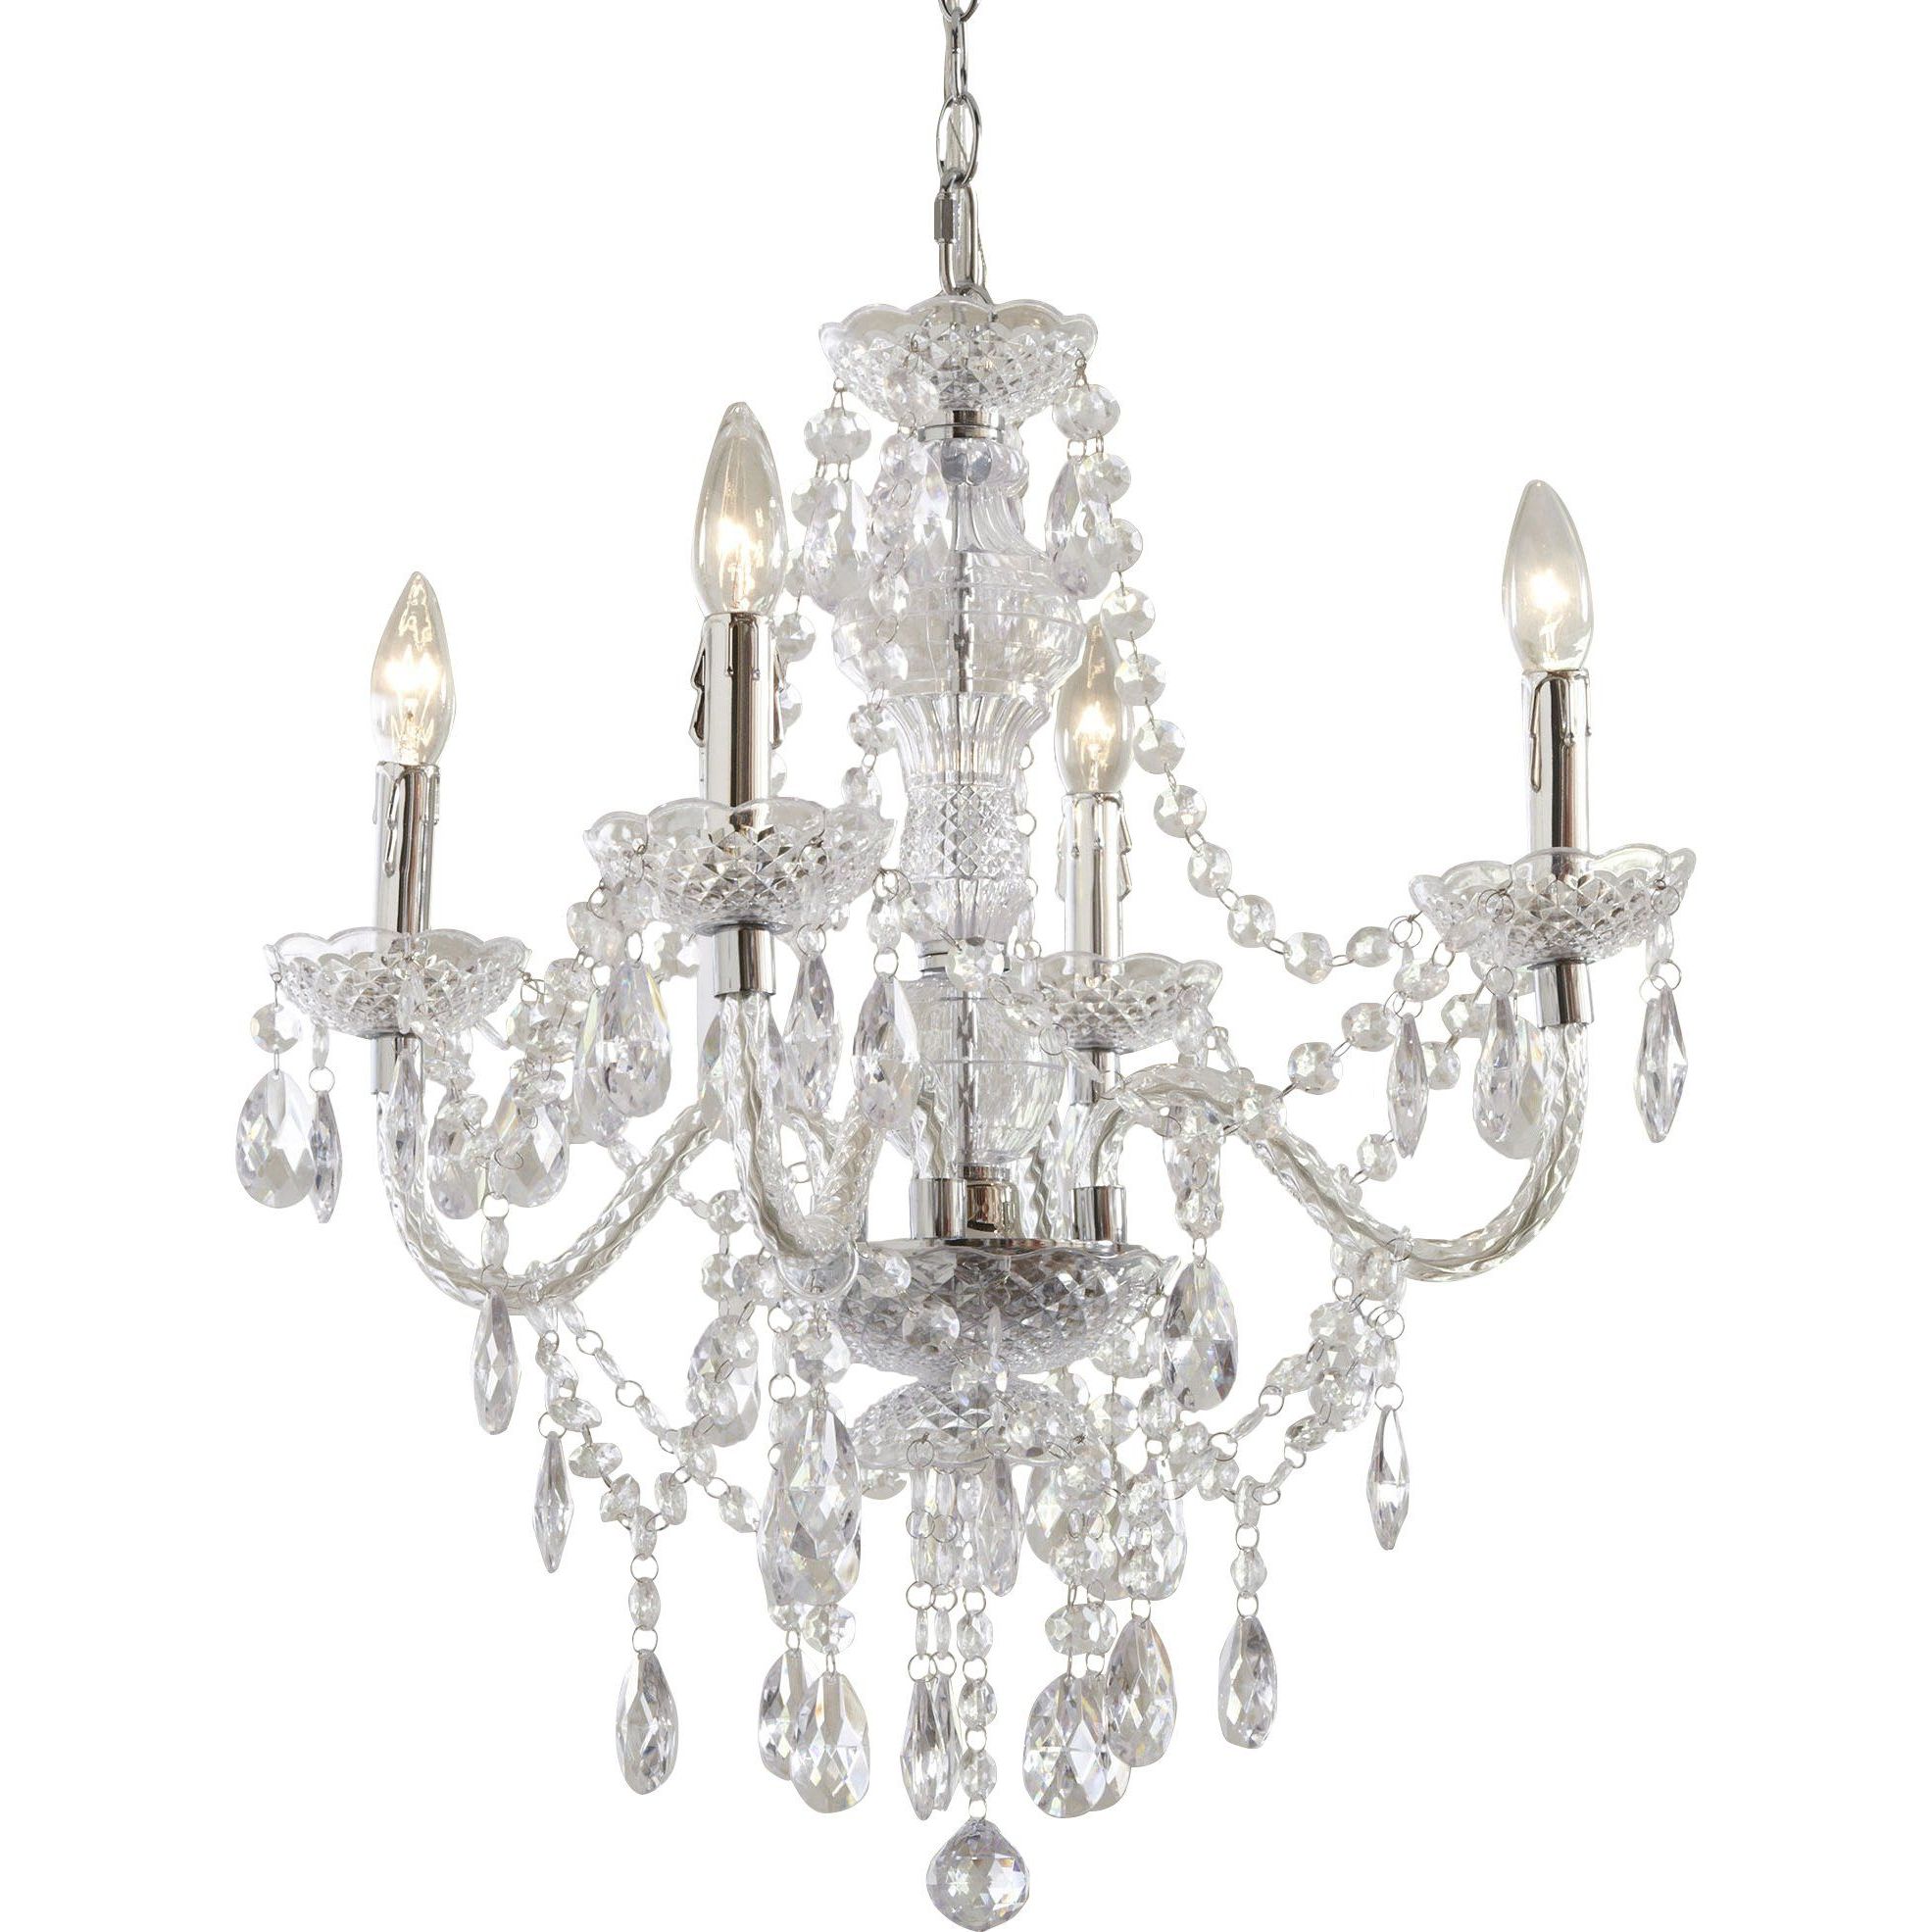 Preferred Blanchette 5 Light Candle Style Chandeliers With Ice Palace 4 Light Crystal Chandelier (View 17 of 25)